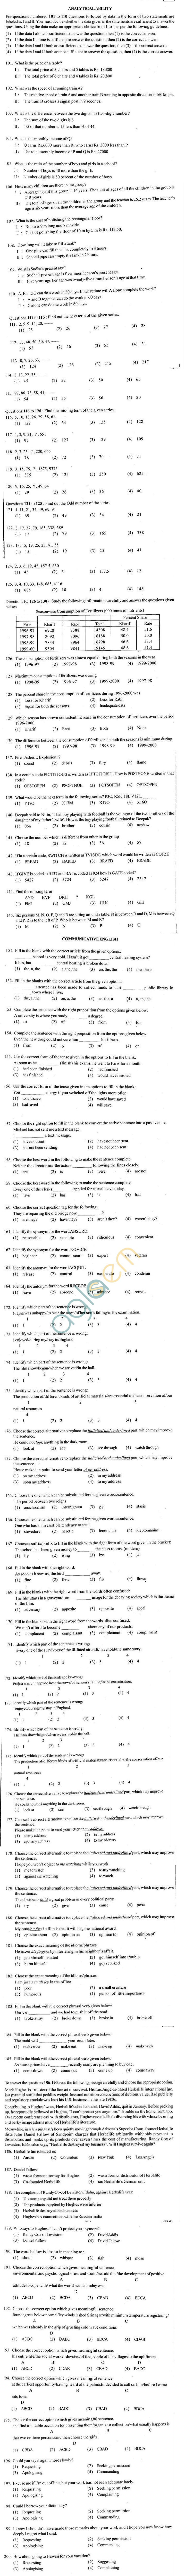 ECET 2012 Question Paper with Answers - BSC – Mathematics